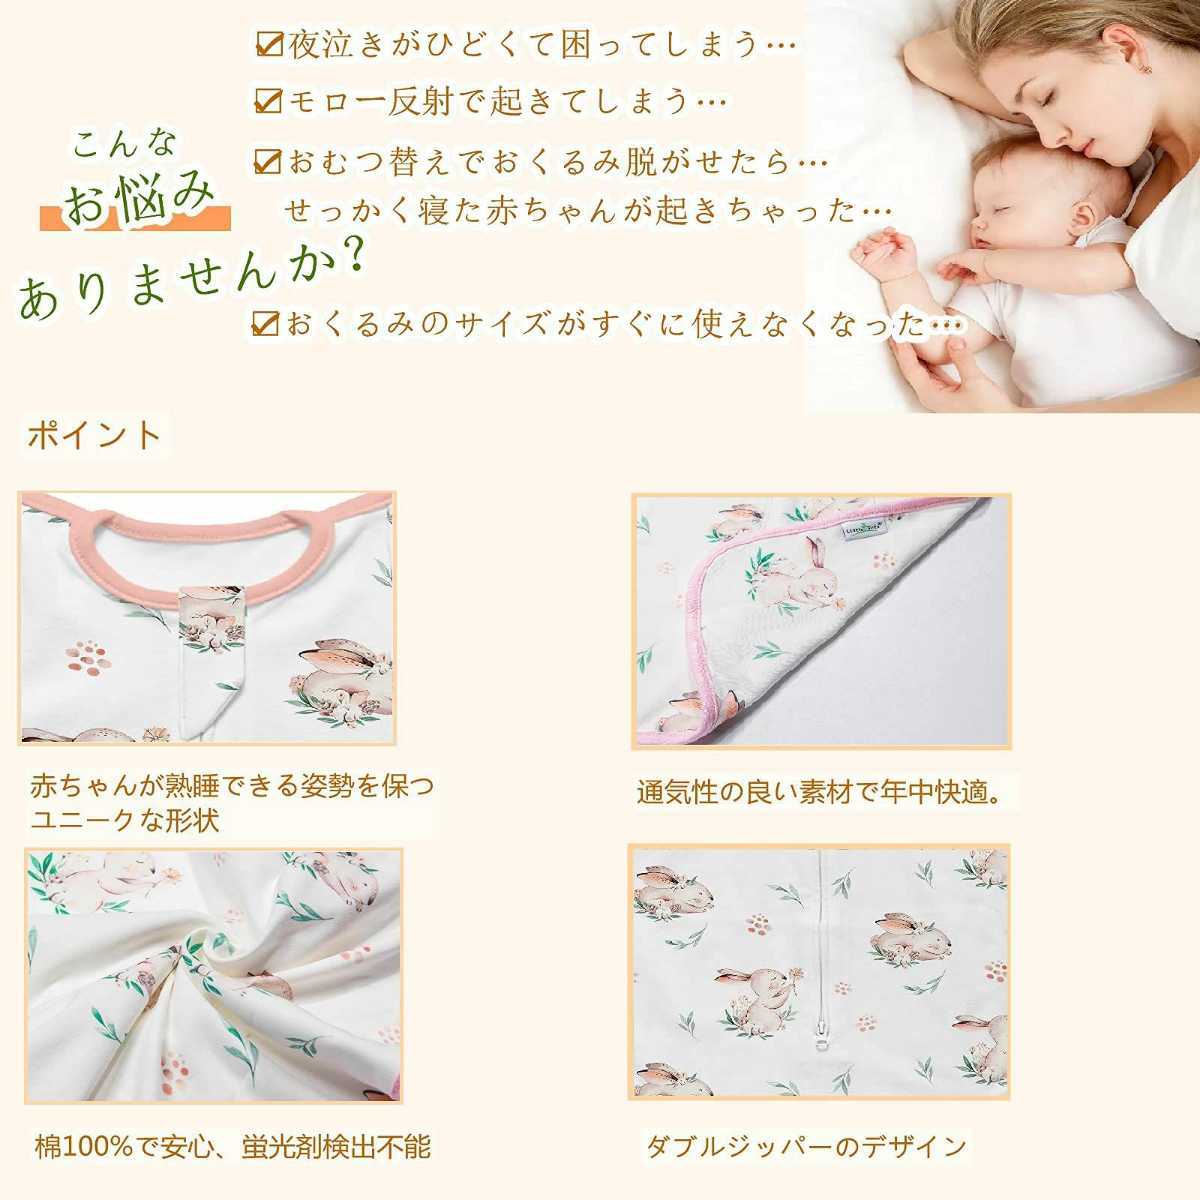  new goods blanket night crying . measures newborn baby clothes goods for baby celebration of a birth baby gray 